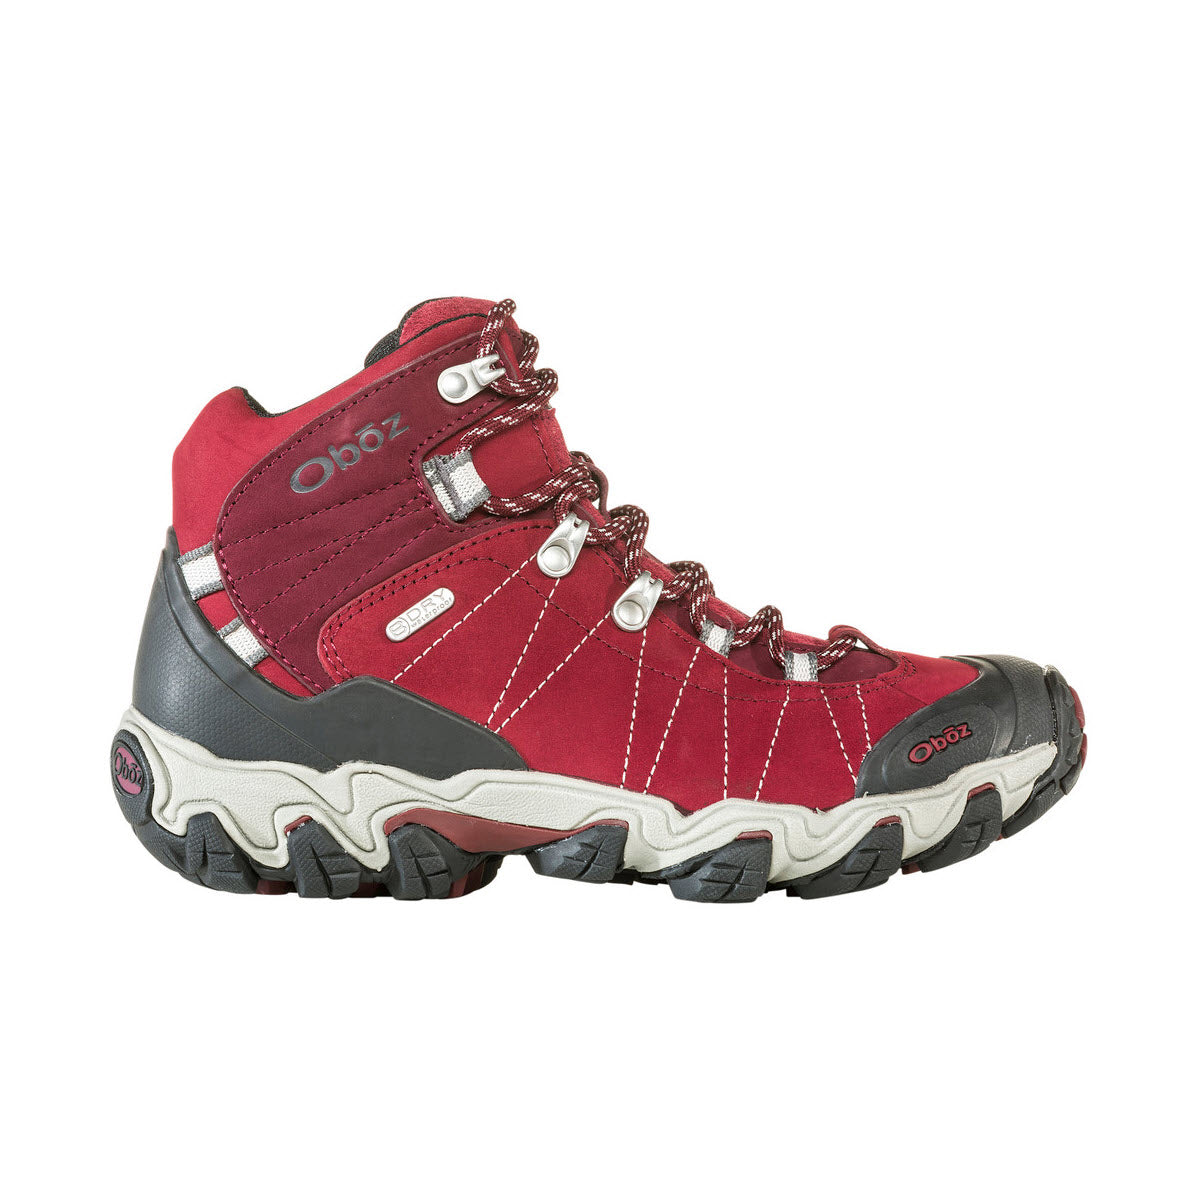 A single red Oboz Bridger Mid BDRY Rio Red hiking boot with gray and black accents, featuring a high ankle, lace-up design, B-DRY waterproofing, and rugged sole.